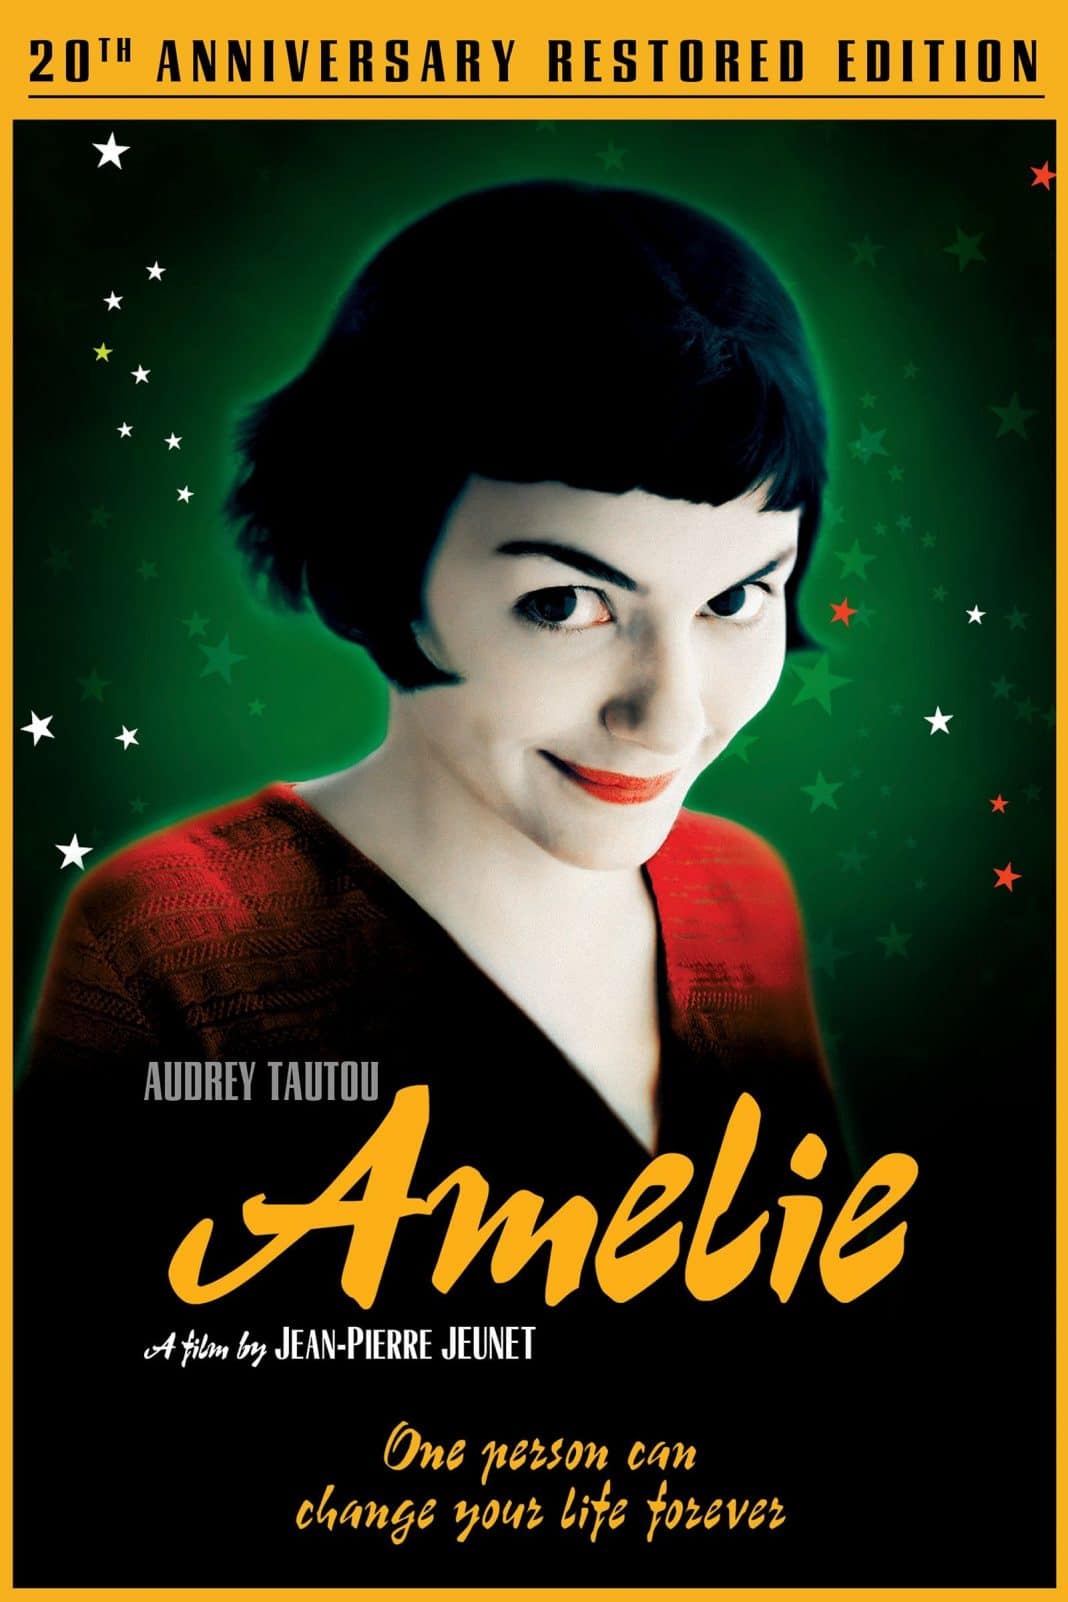 DVD case showing enigmatic smiling face of French actress Audrey Tatou starring in 'Amelie'